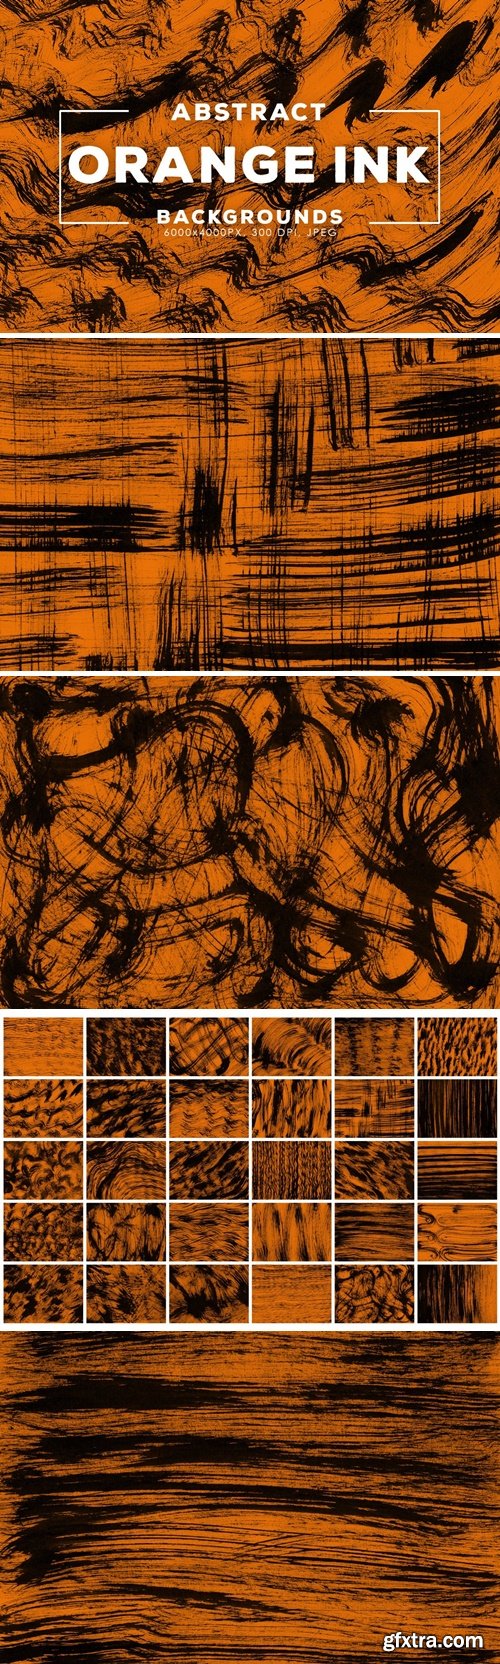 Orange Abstract Ink Backgrounds